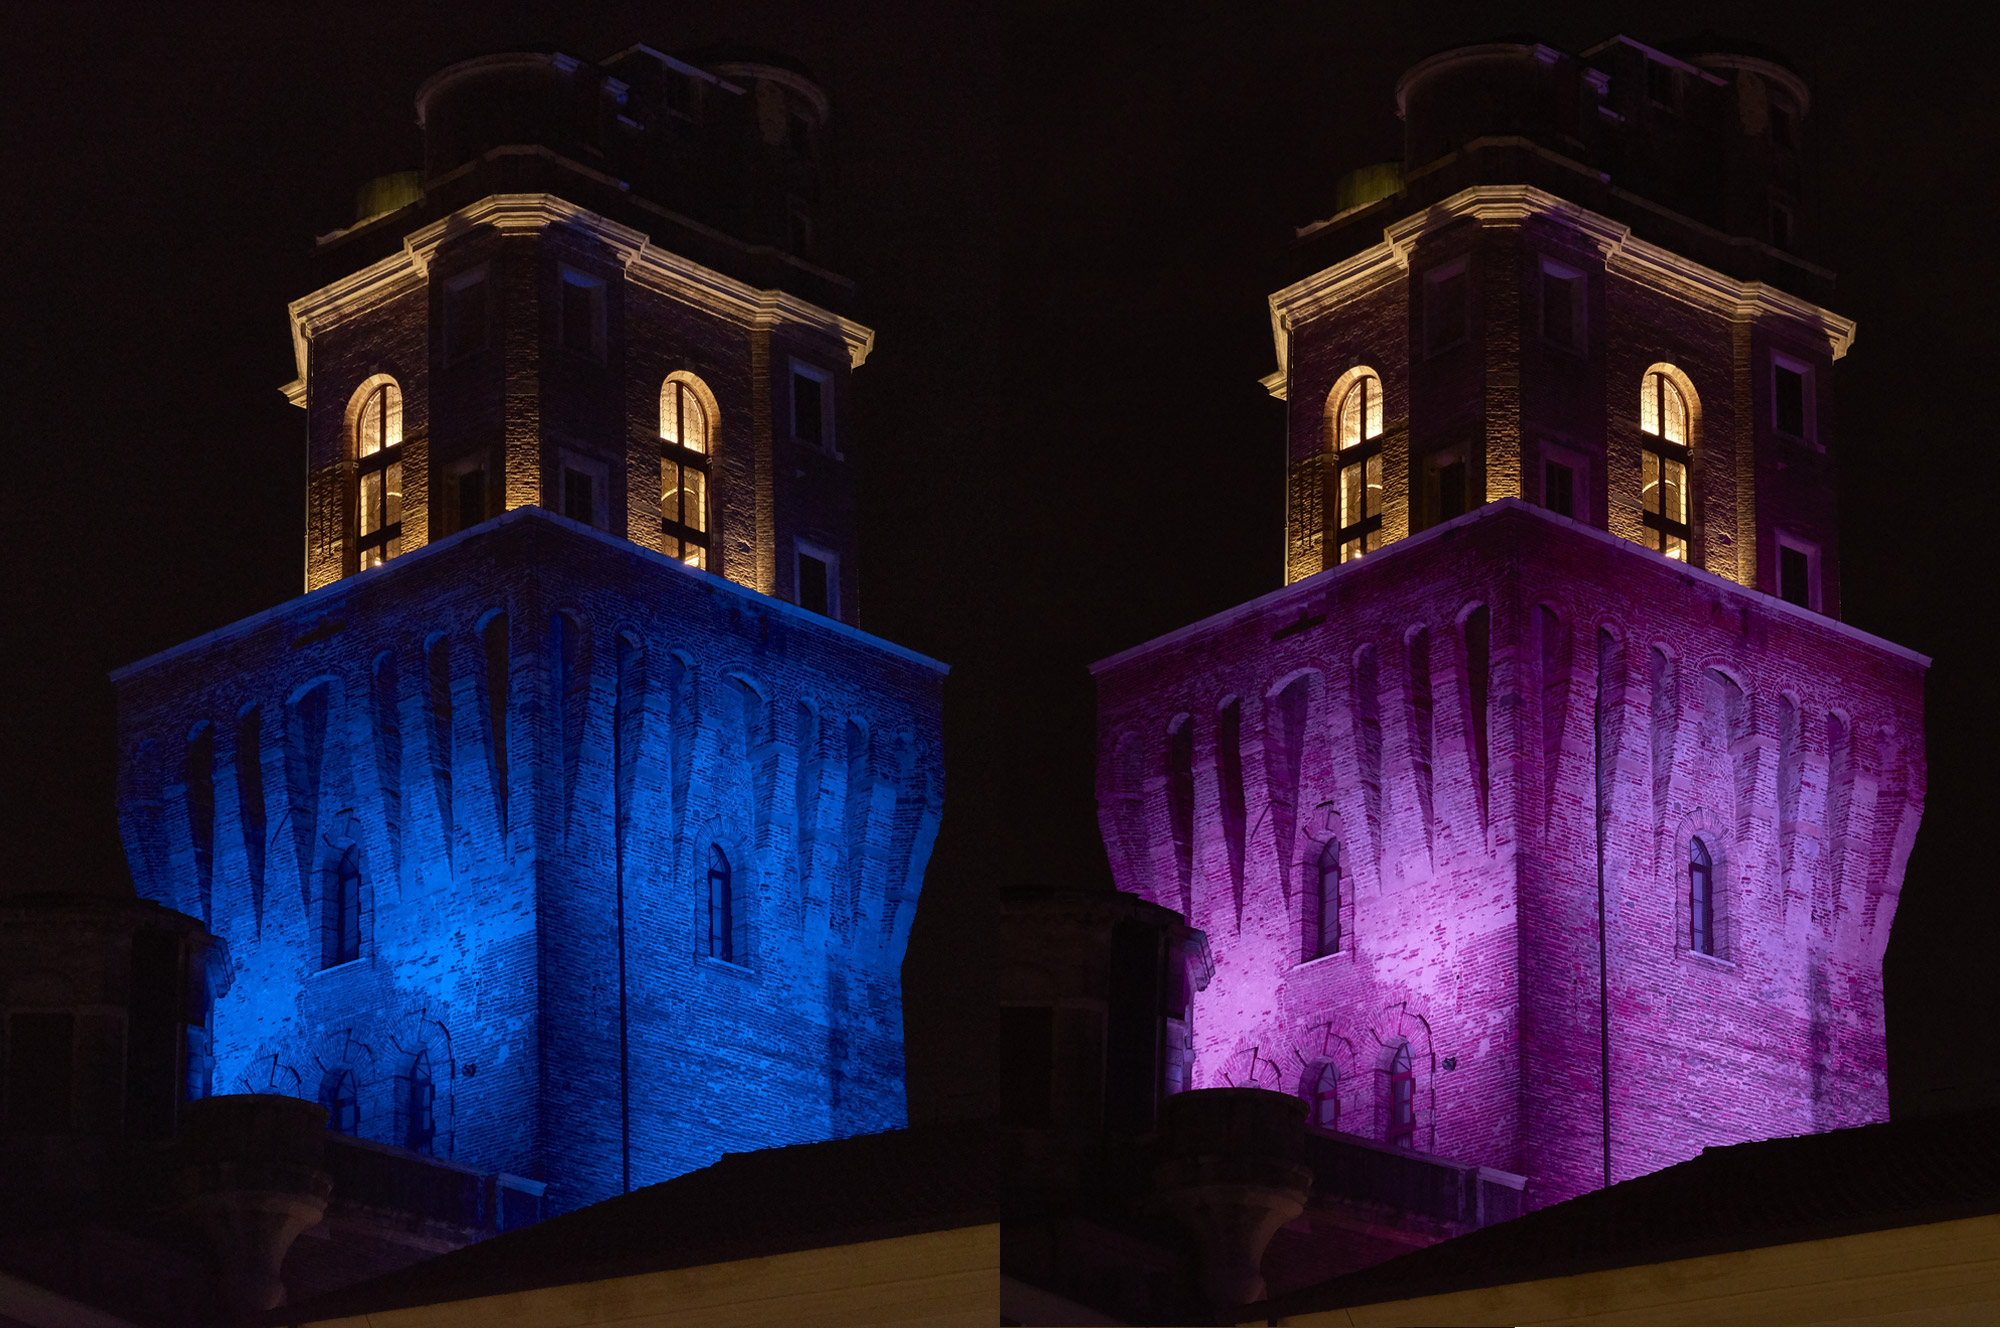 Lighting the Specola tower: “A cultural, not just a technical project”